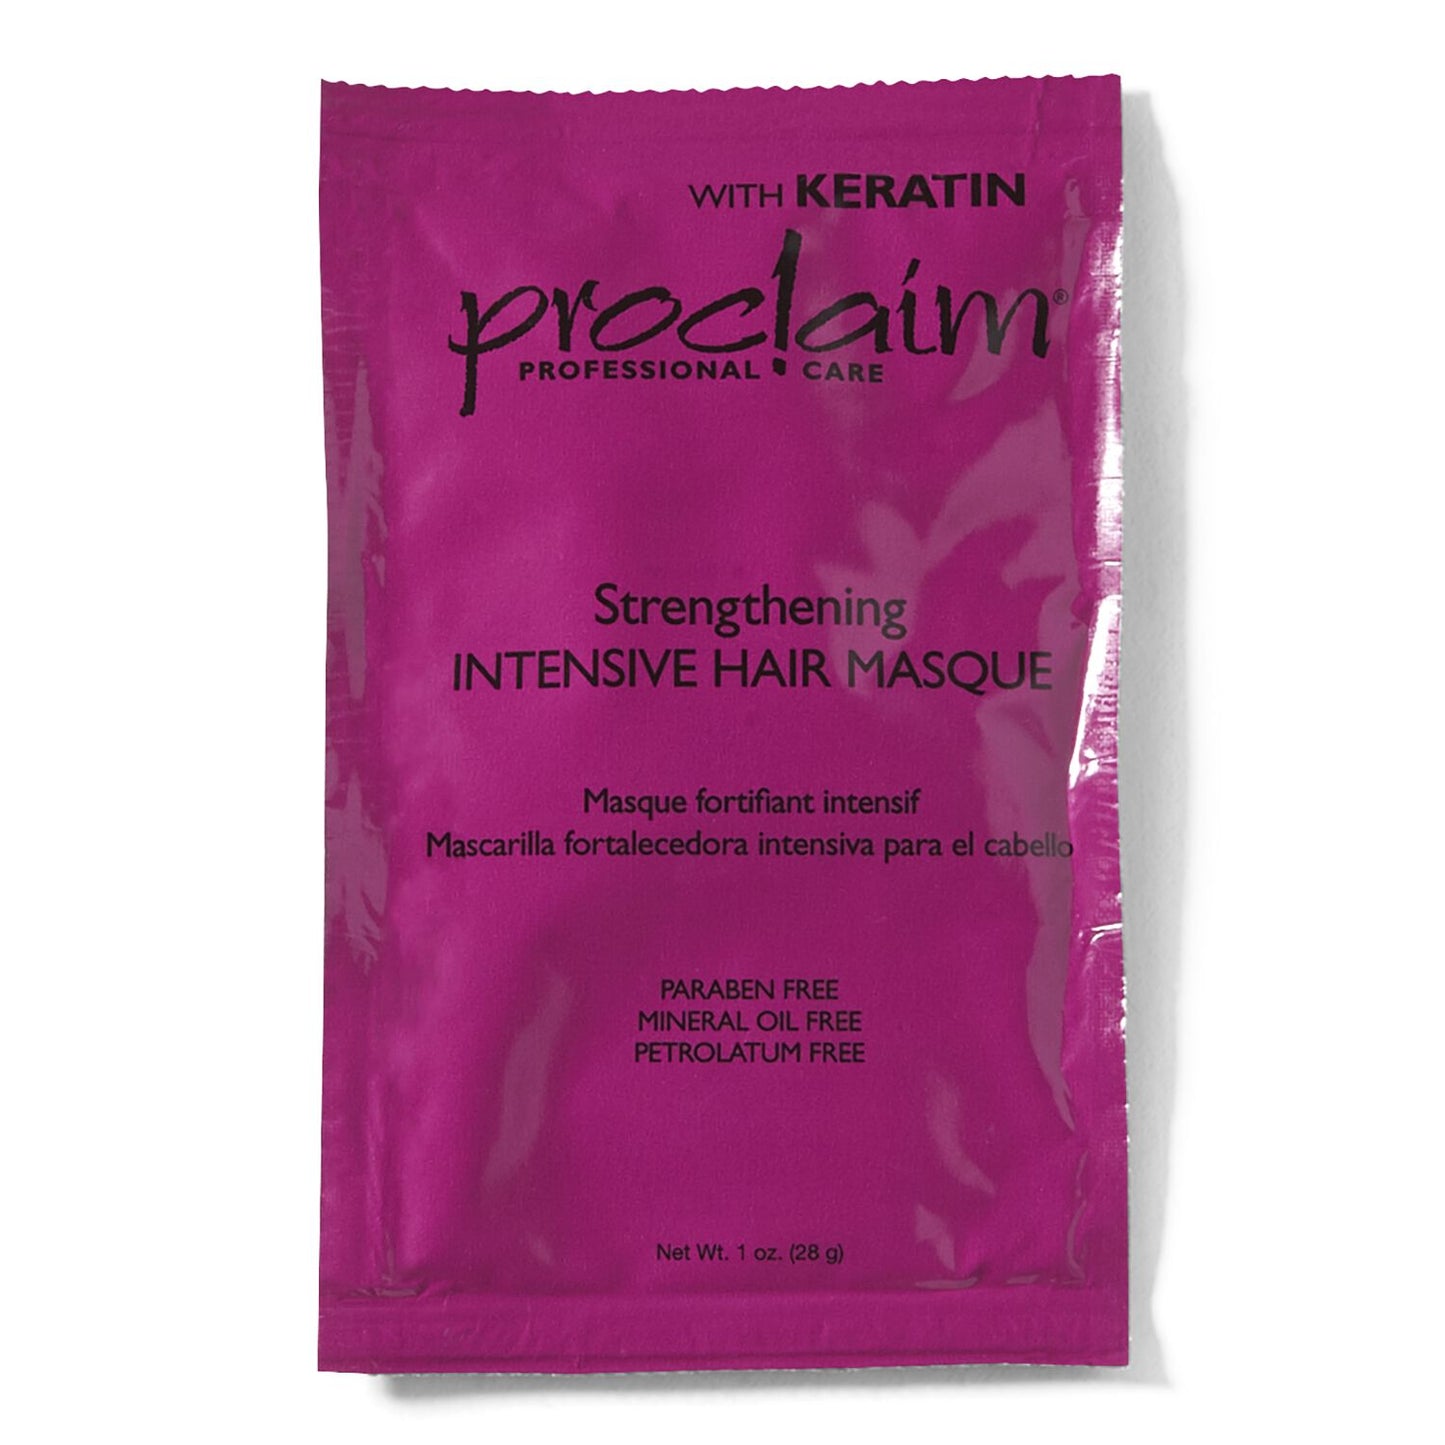 Proclaim Strengthening Intensive Hair Masque Packette